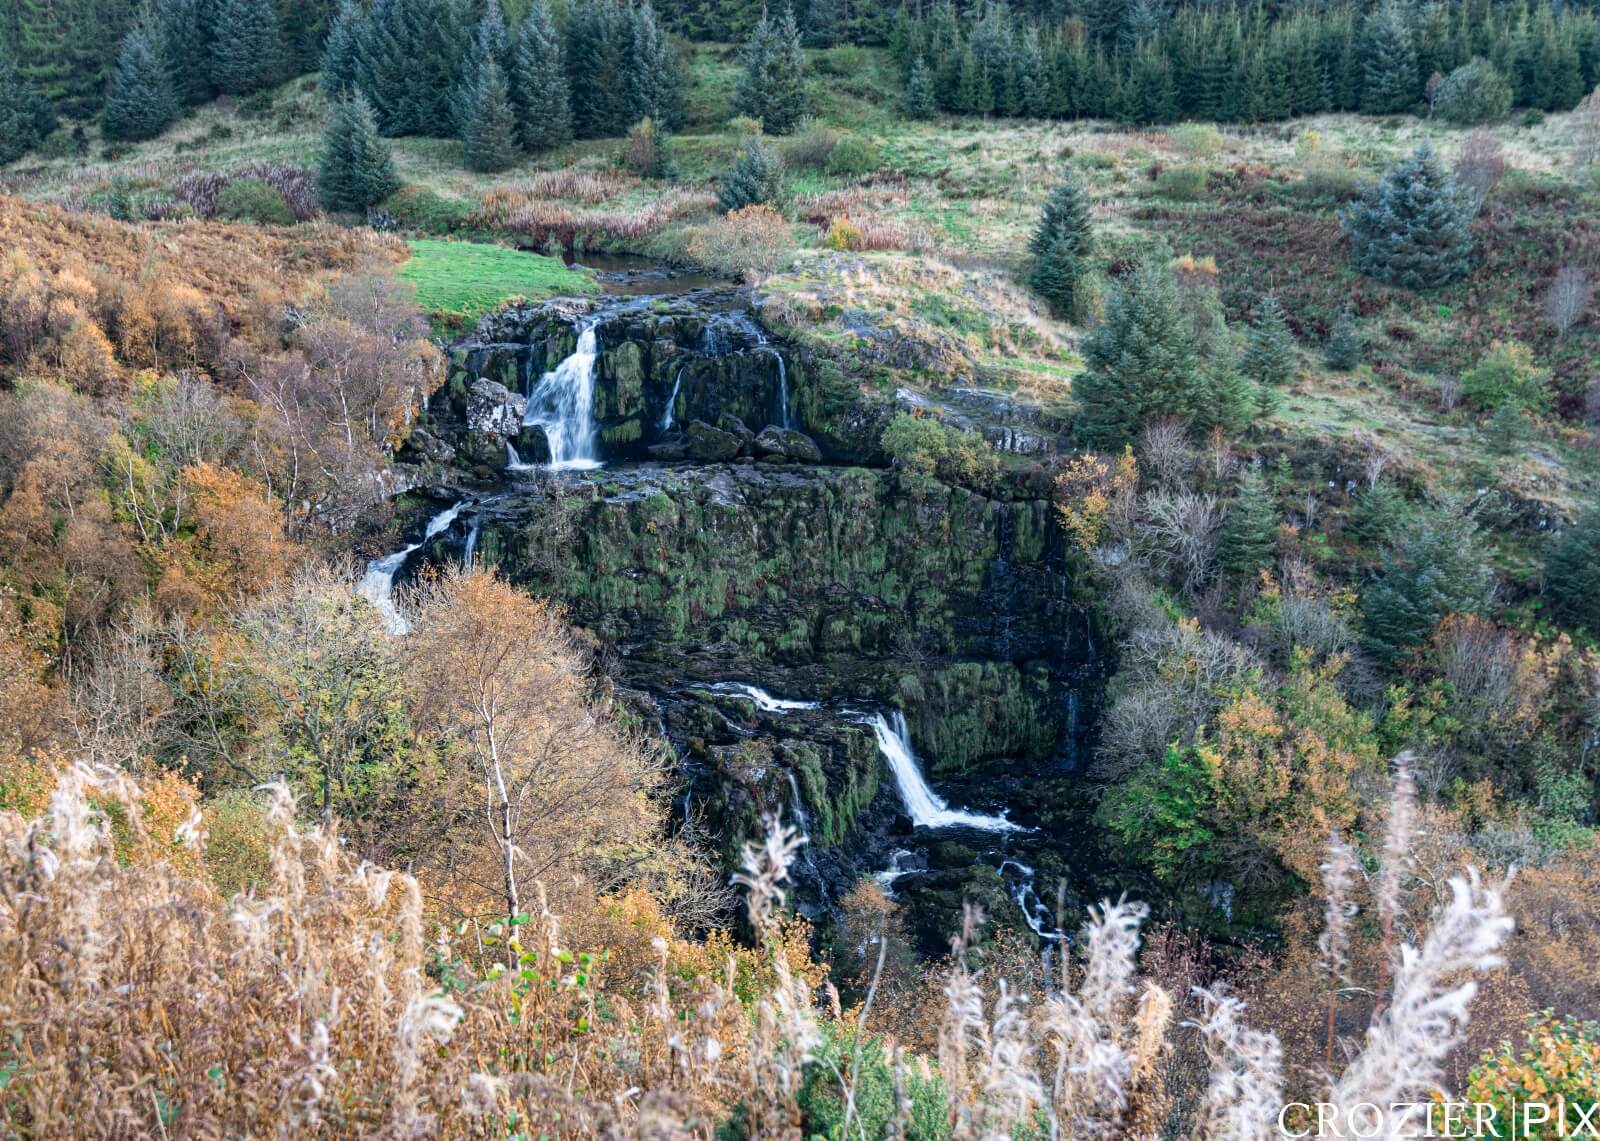 Image of The Loup of Fintry by Alan Crozier